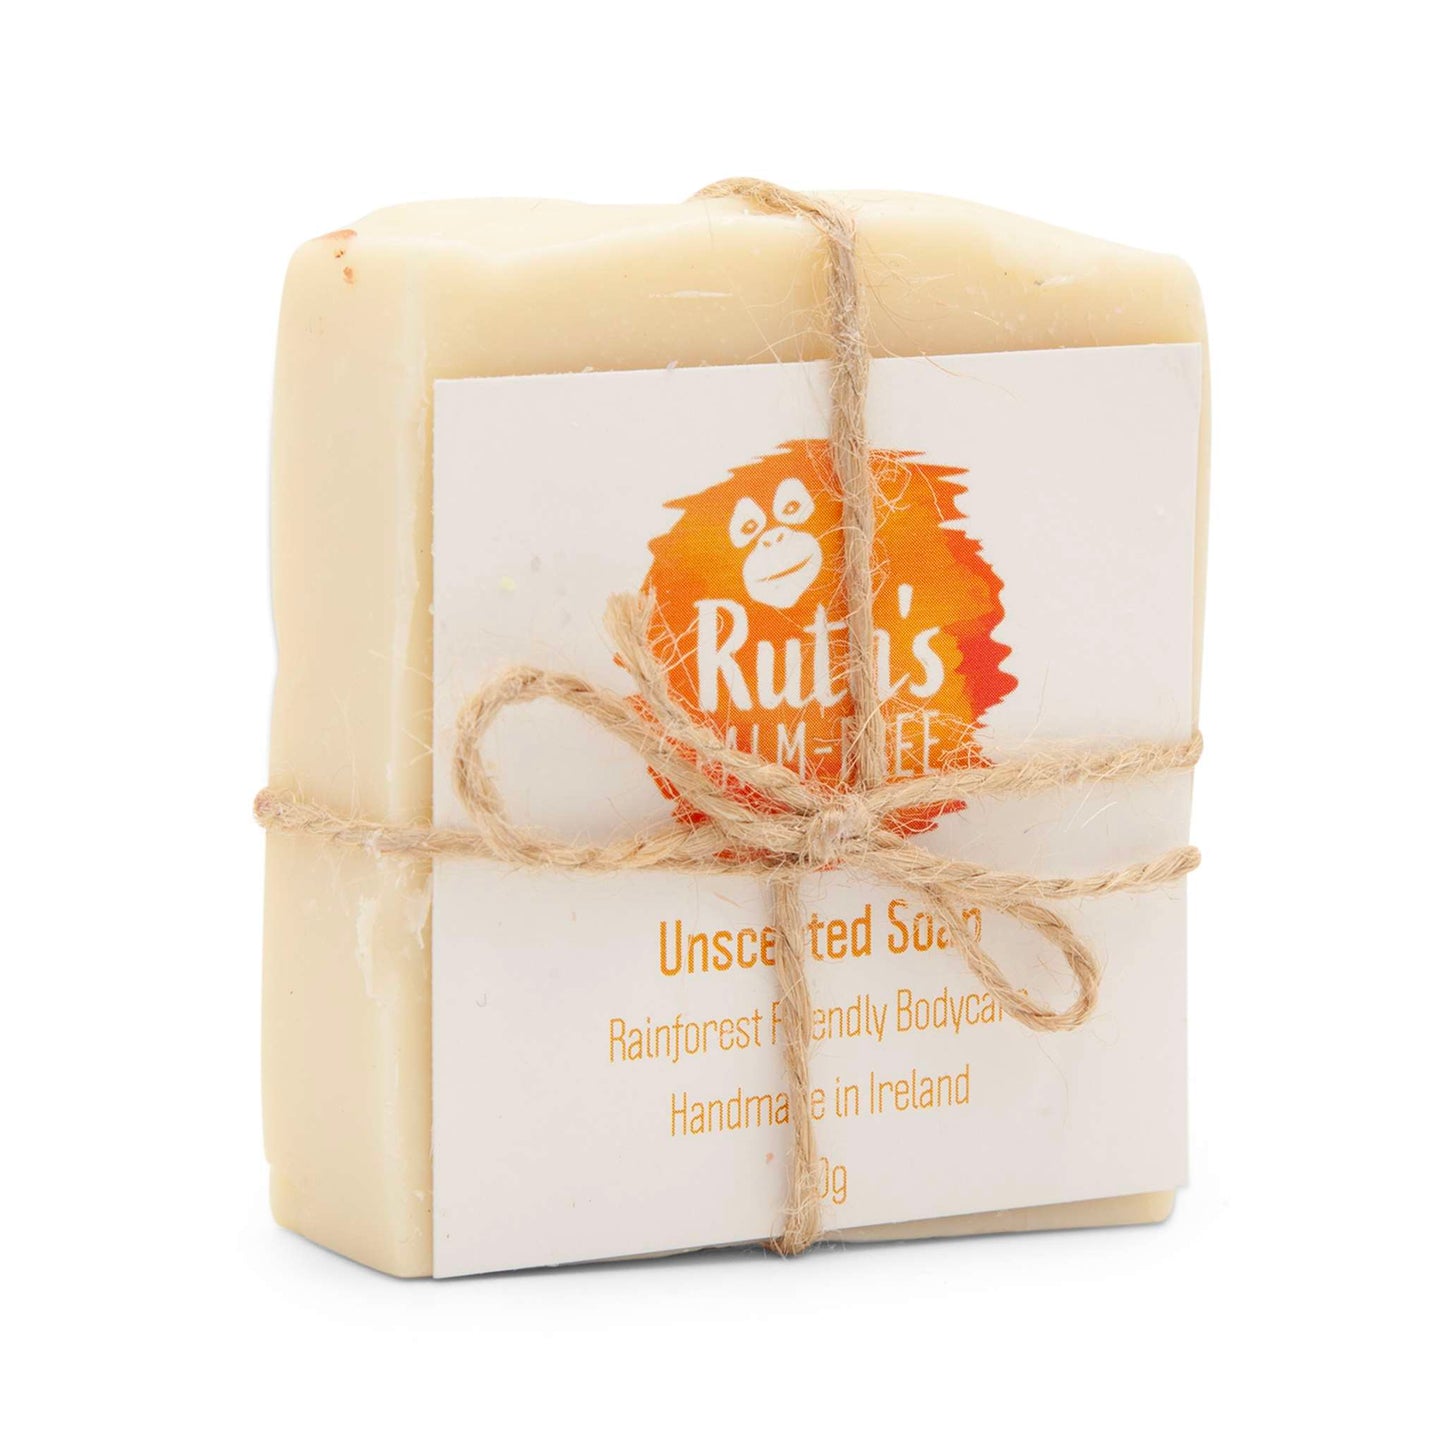 Ruth's Palm Free Soap Ruth's Palm Free Naked Soap - Olive & Coconut - Unscented